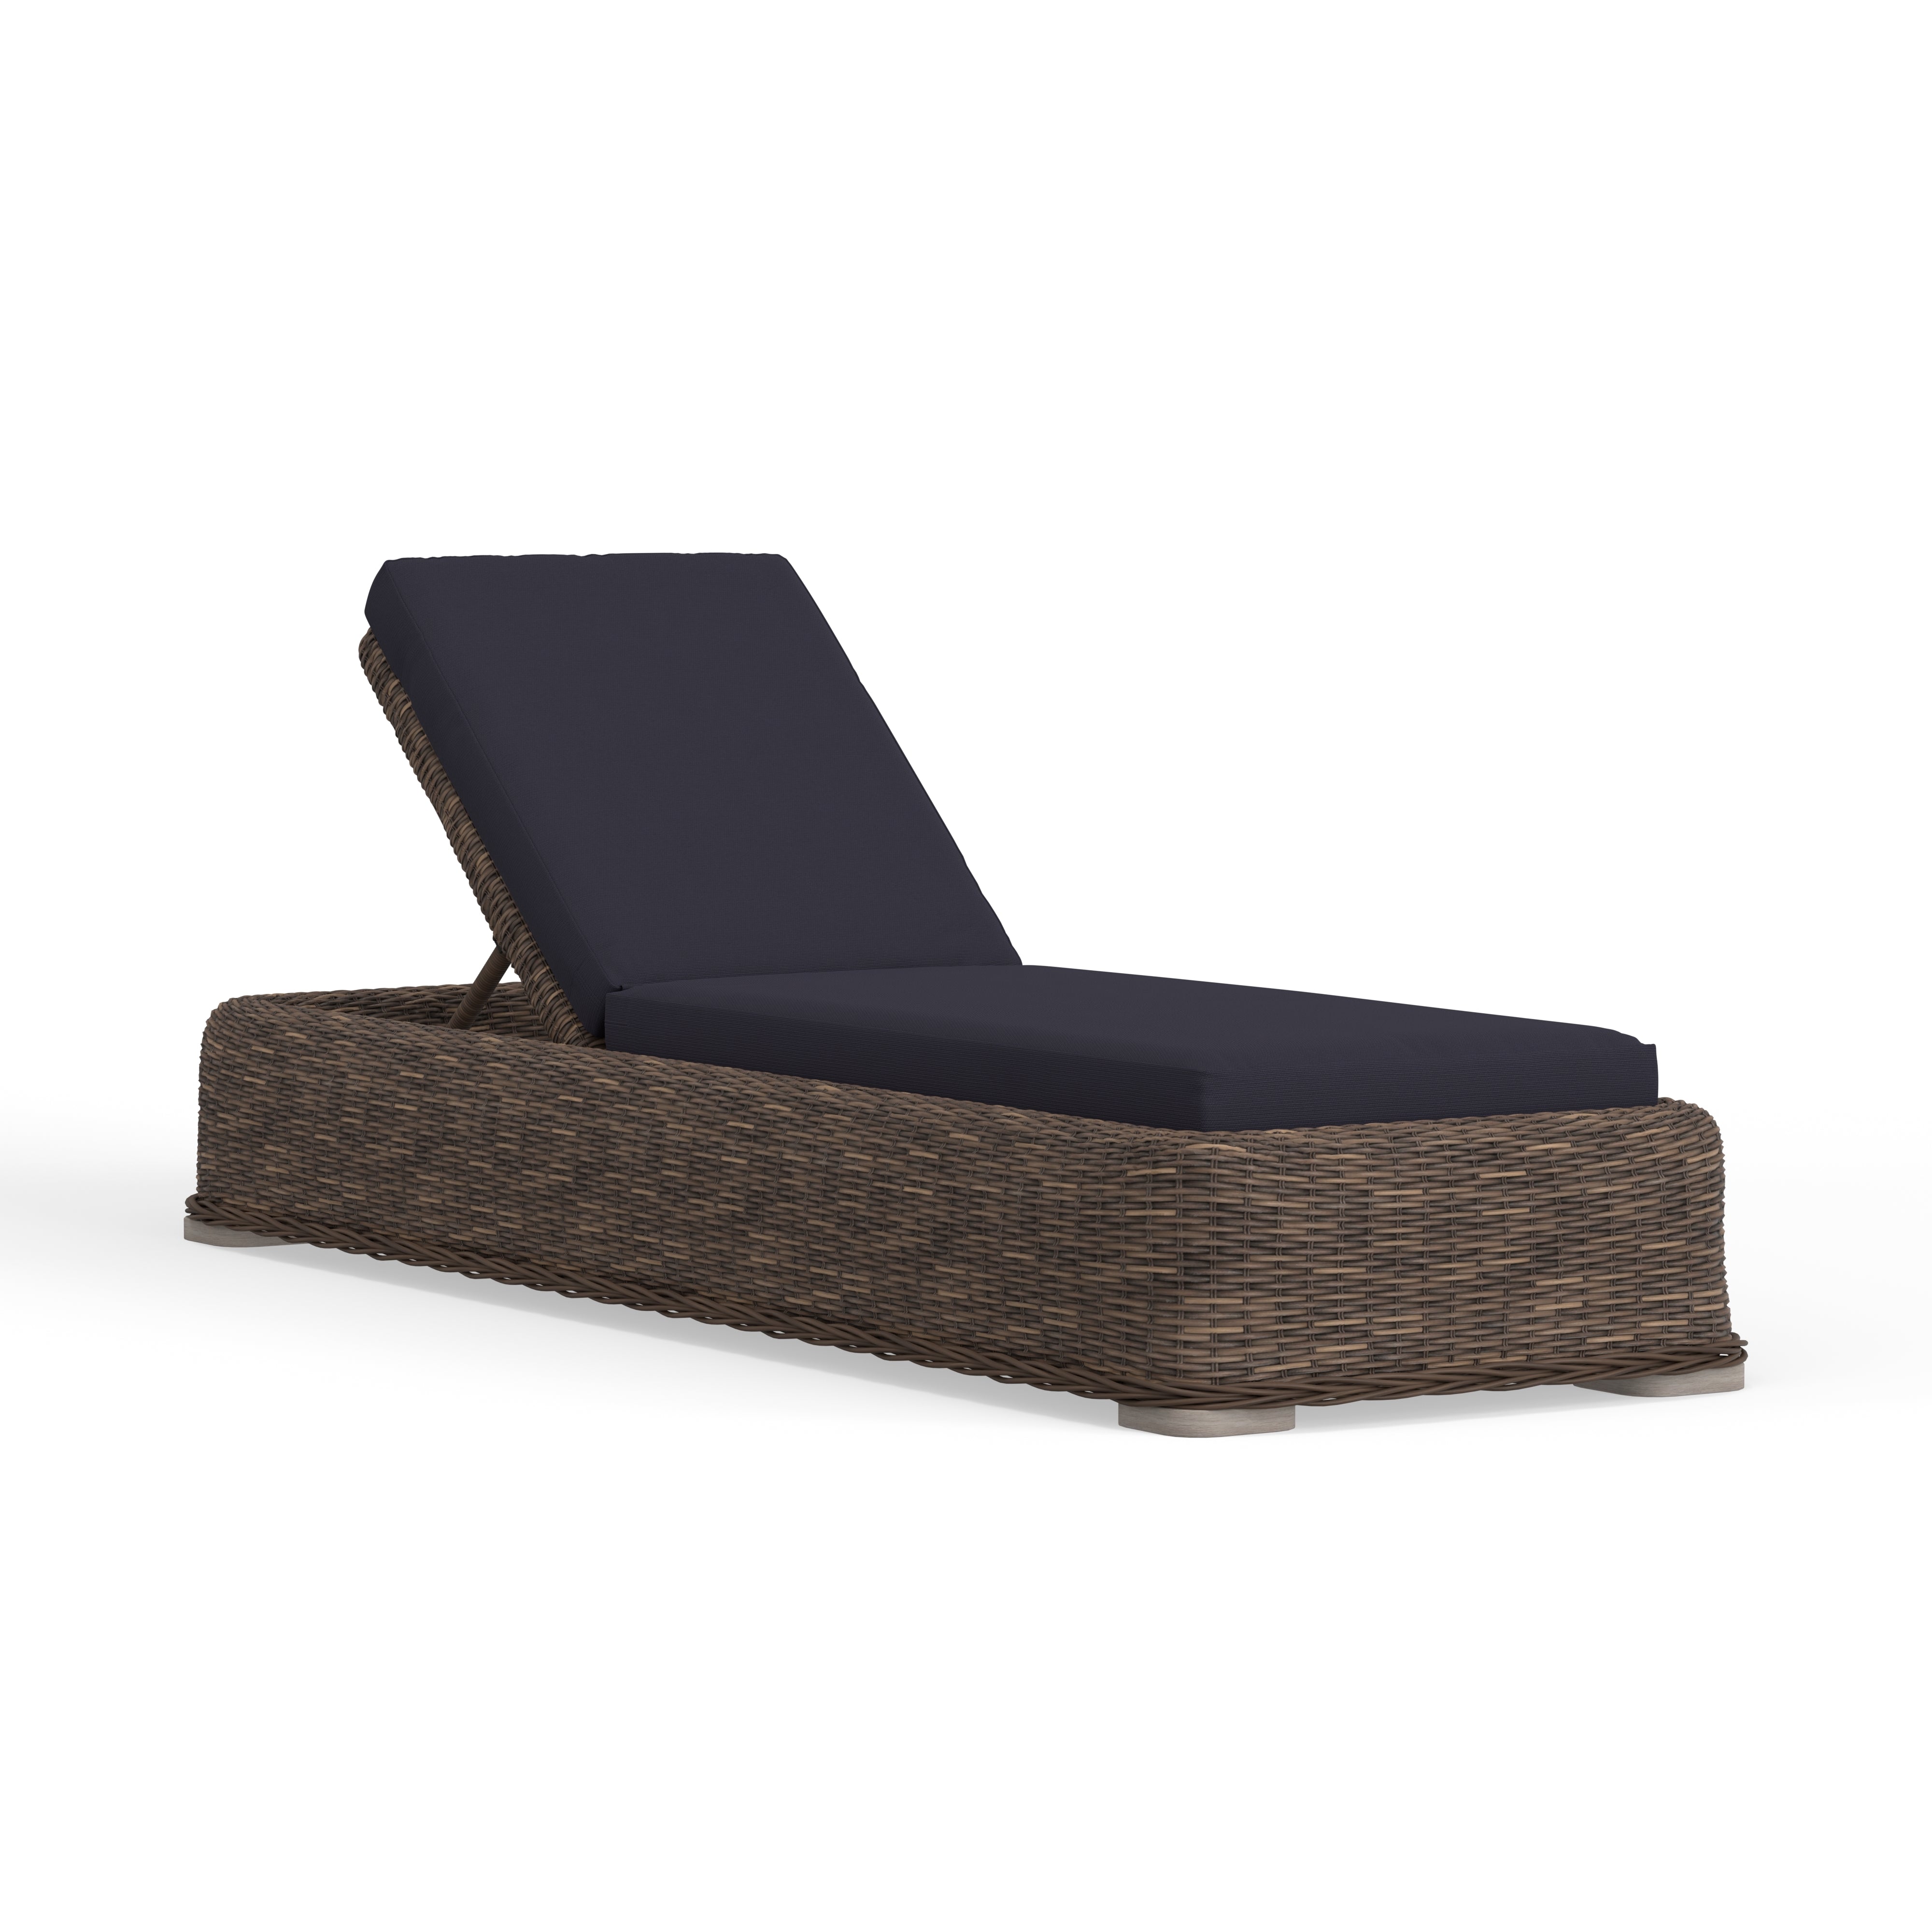 Modern Wicker Chaise Lounge For Patios